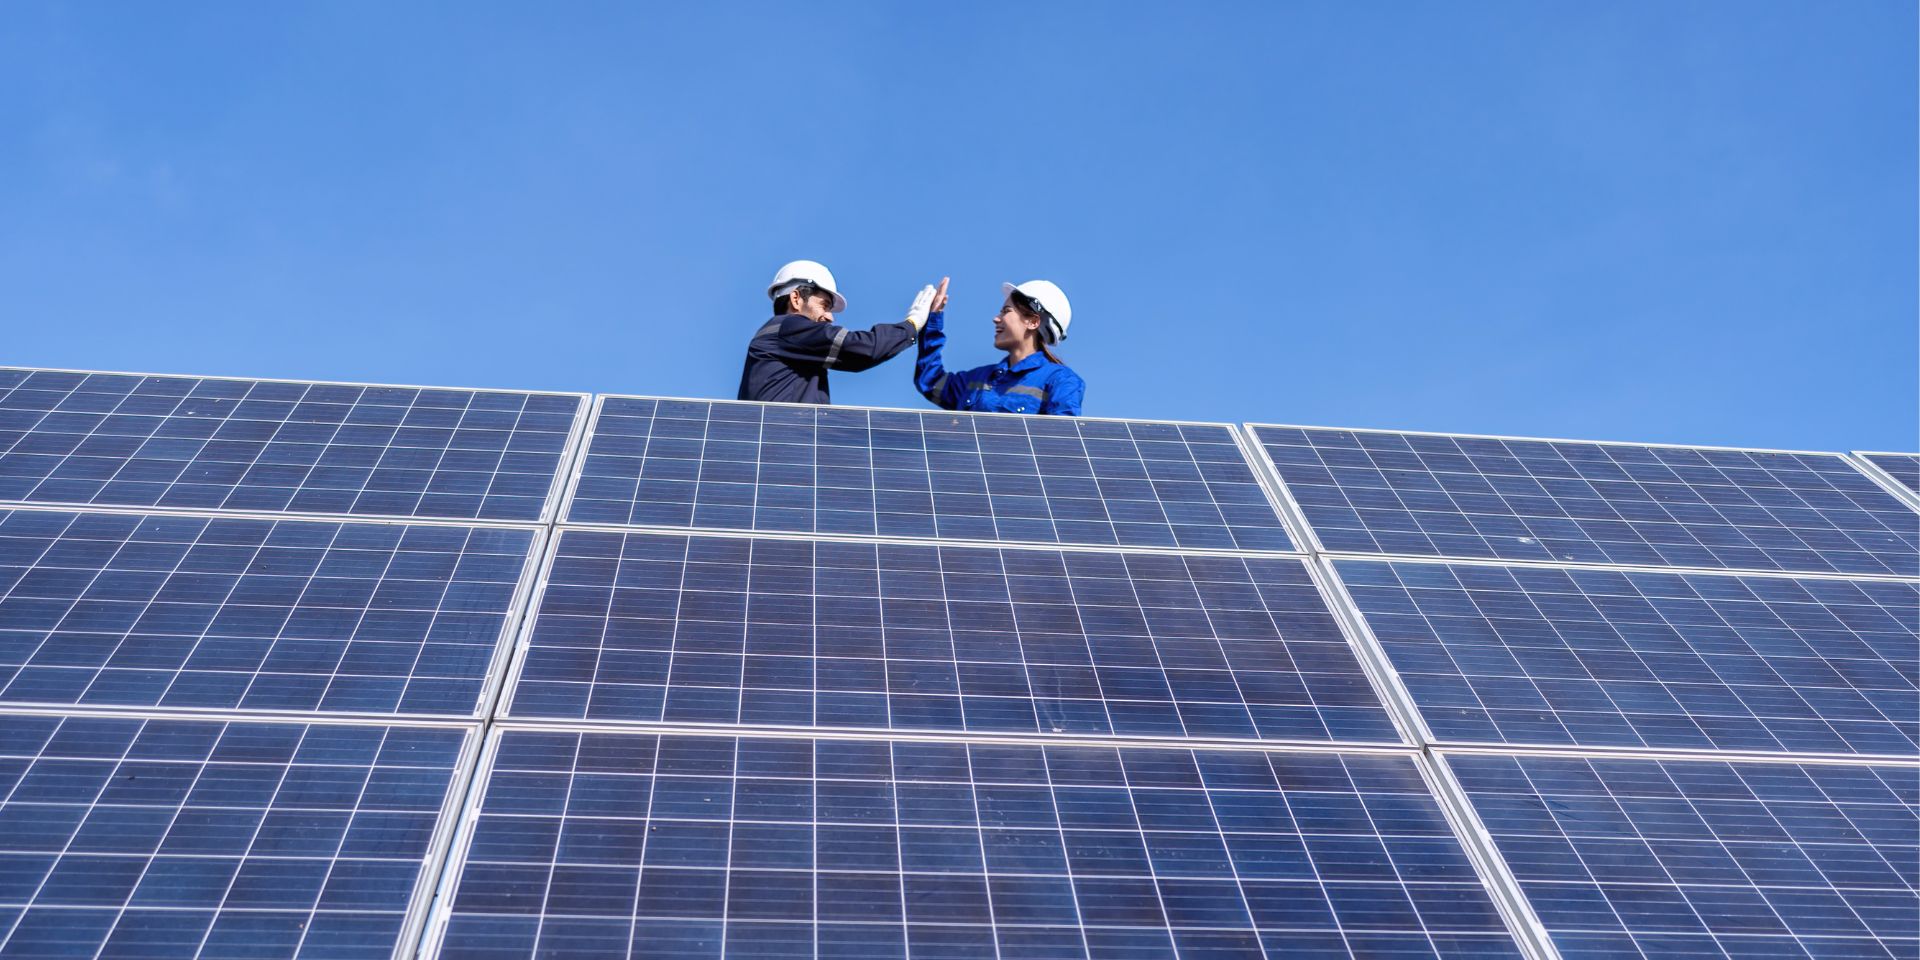 Trusted professionals from ManageLife conducting solar panel inspections with precision